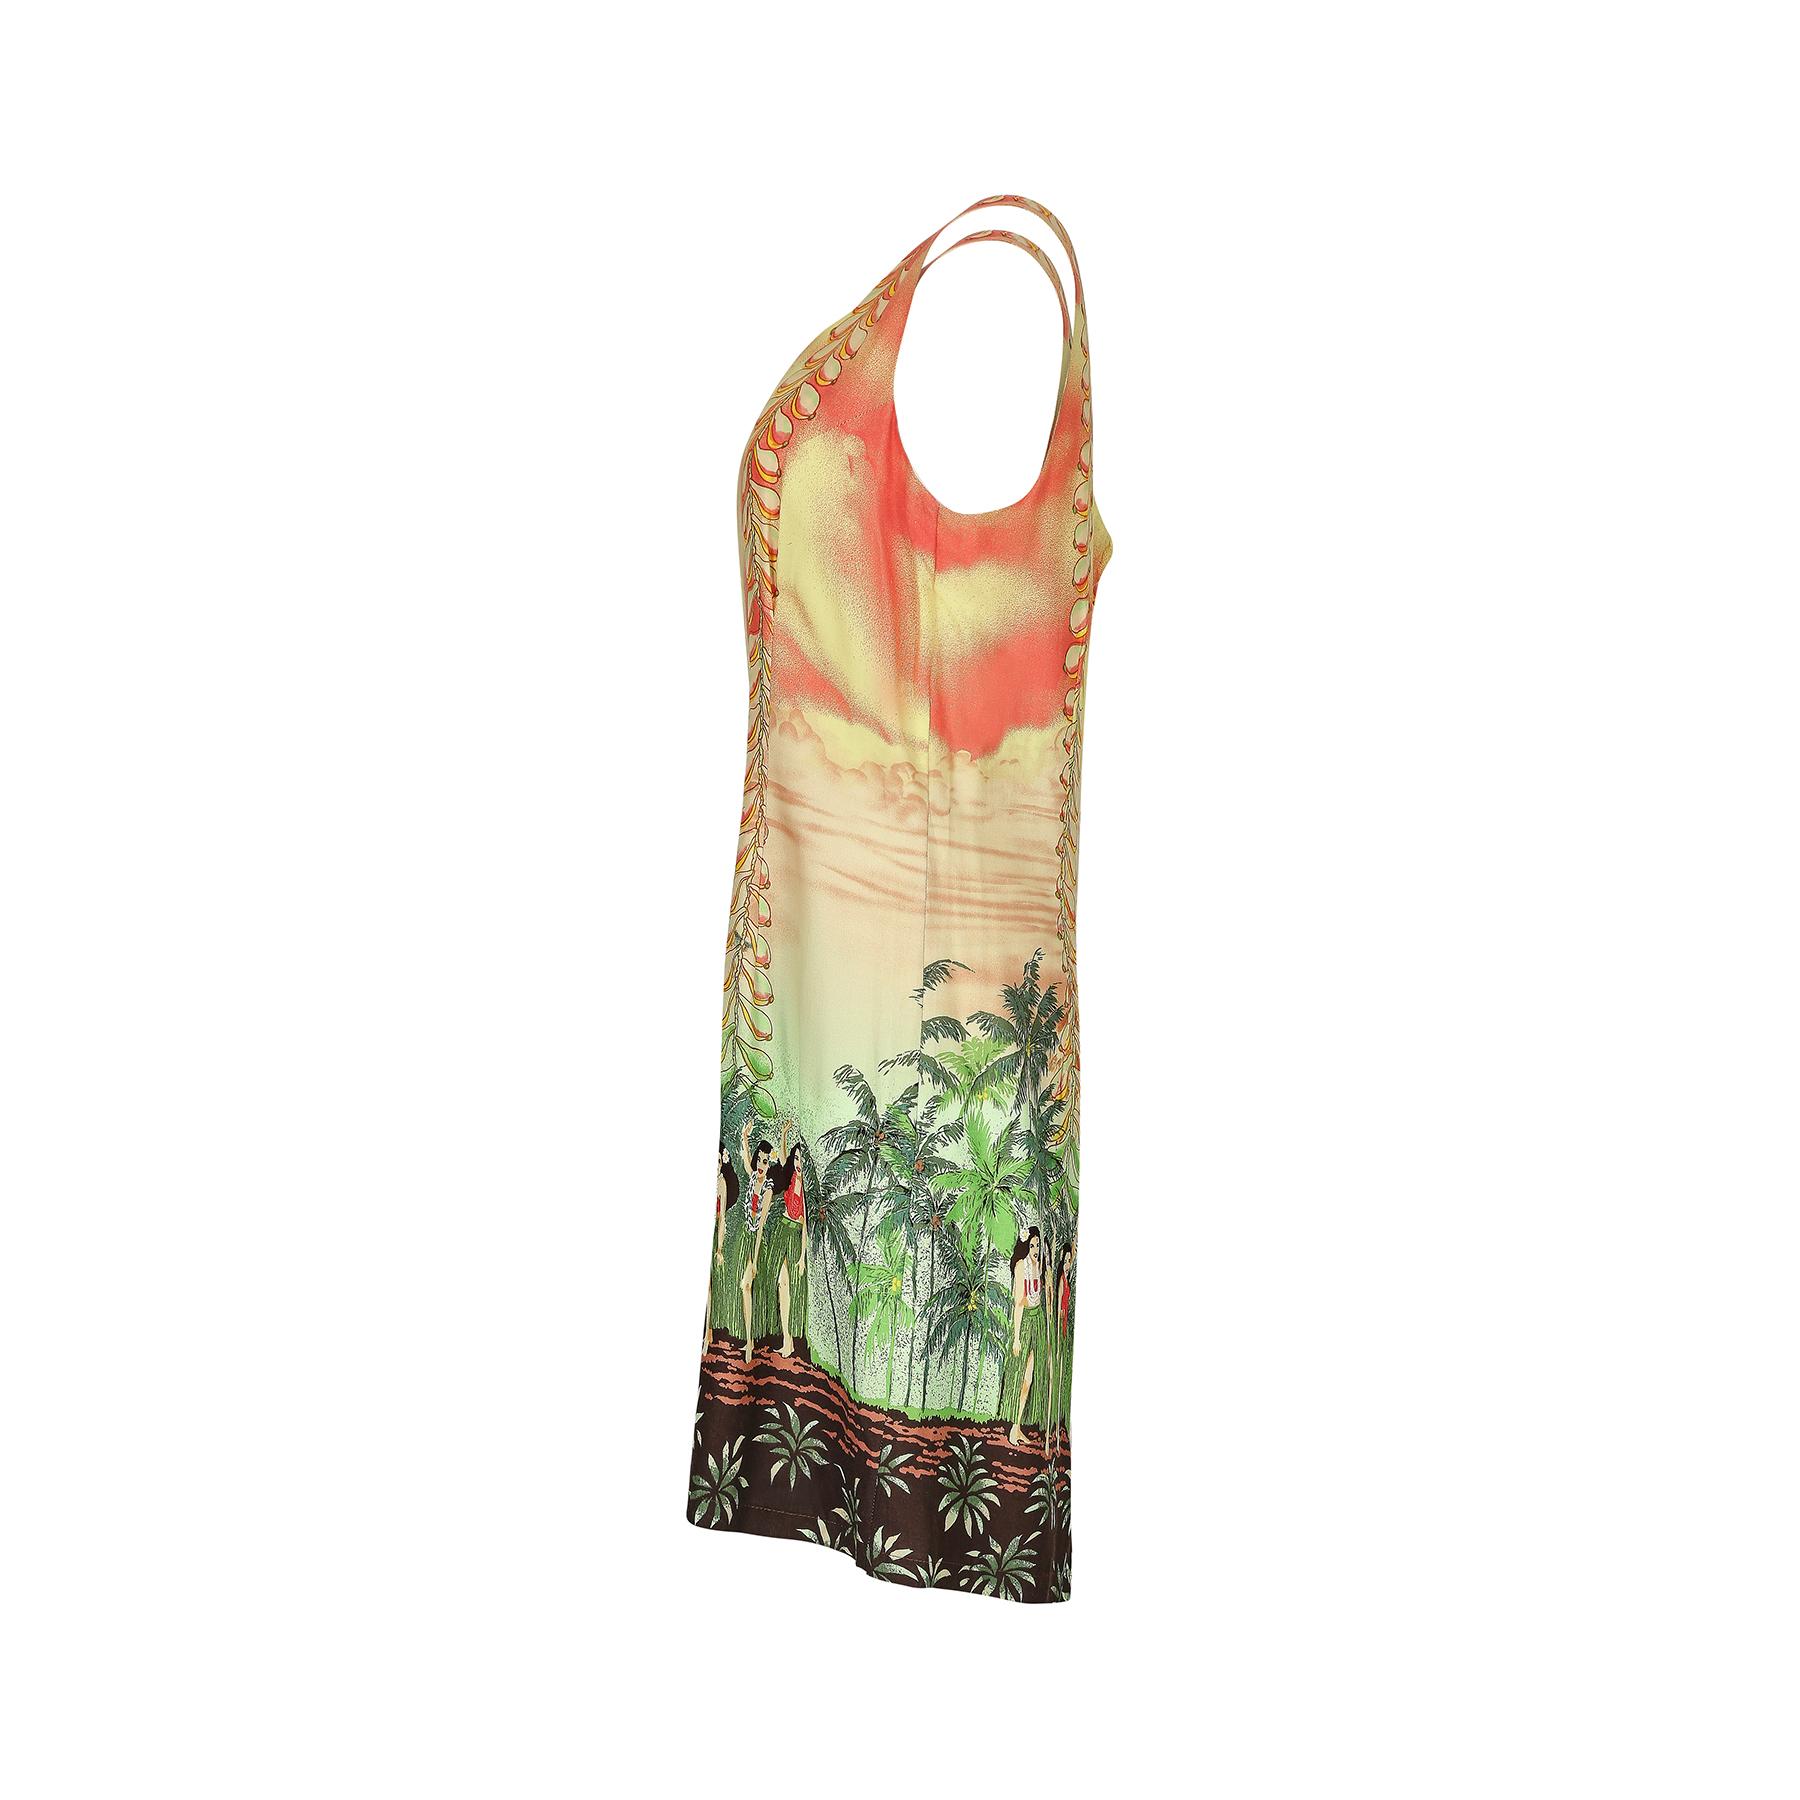 This 1990s or early 2000s Hawaiian dress is, in its most literal sense a 'Hawaiian dress' featuring a scenic print of lush vegetation, hula ladies, Hawaiian mountain ranges against a sunset gradient and a US Second World War fighter aircraft. It is